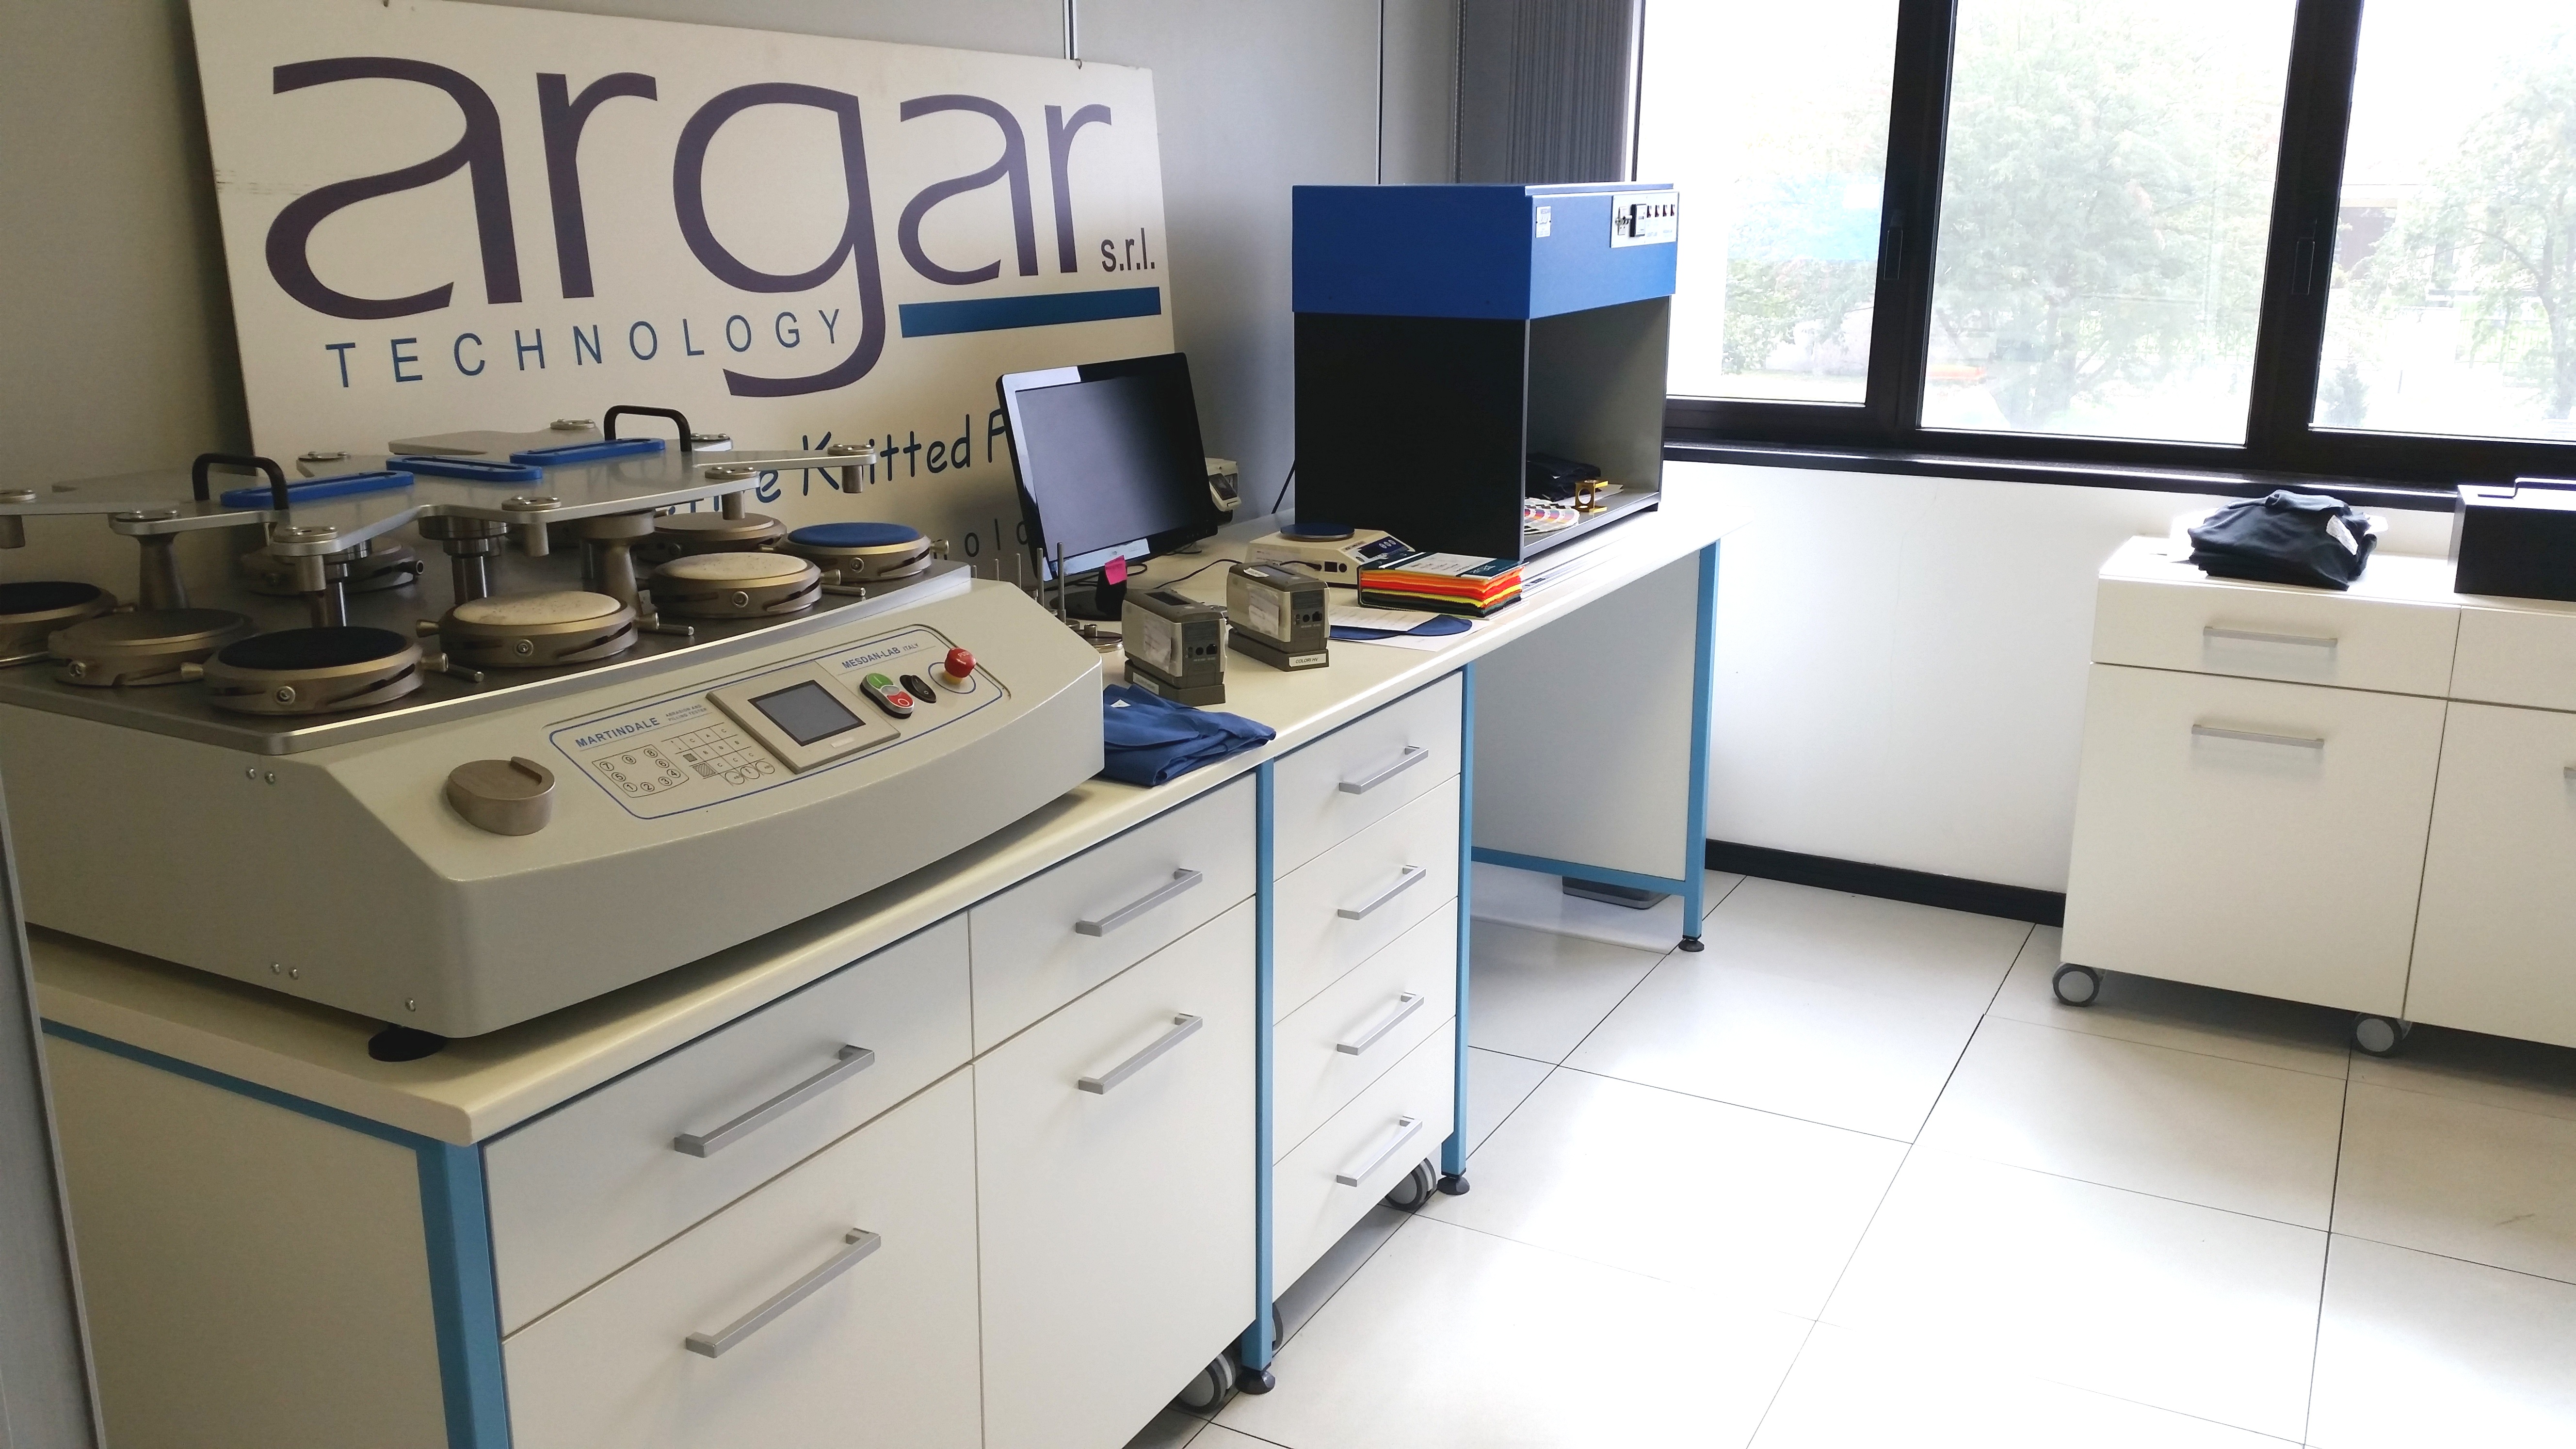 The innovative Italian manufacturer expanded its Quality and R&D laboratories with the installation of new testing equipment. © Argar Technology